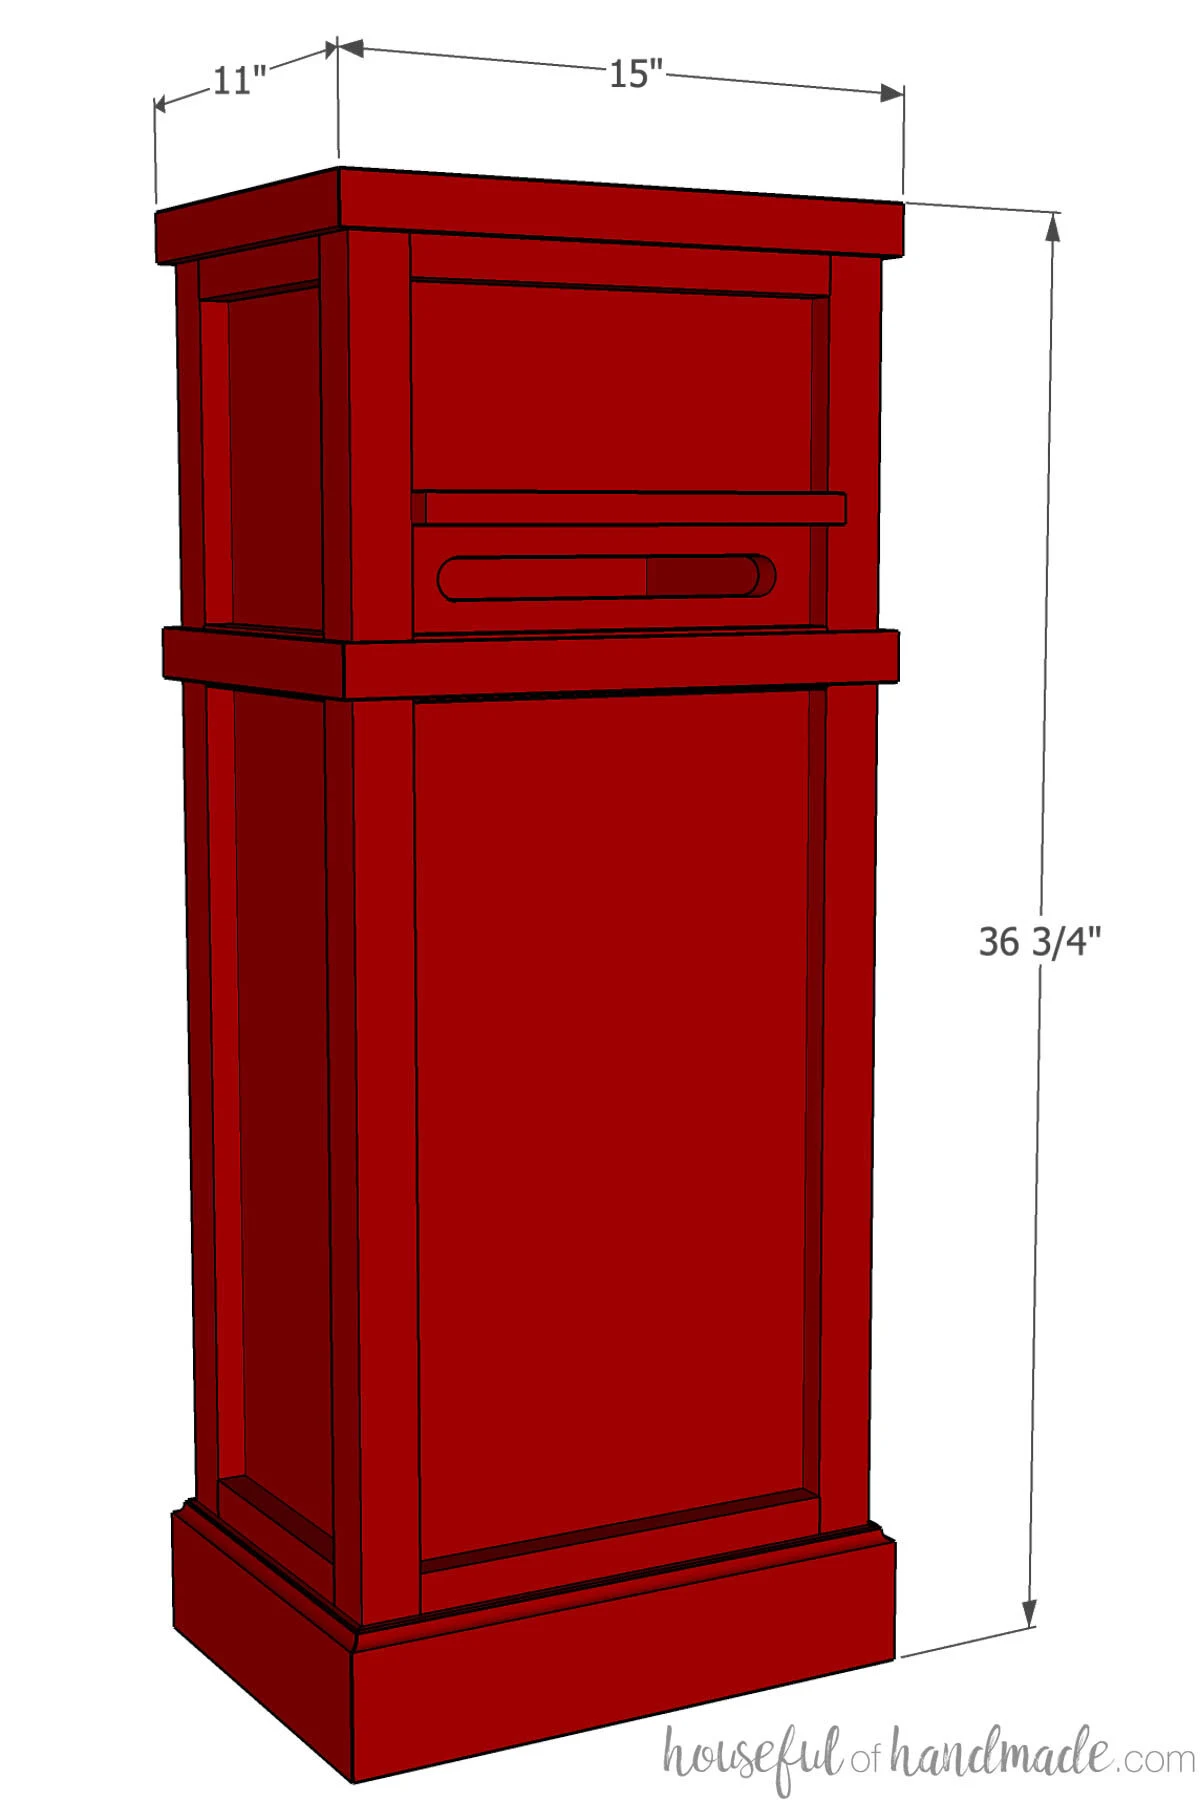 3D drawing of the Santa mailbox with dimensions noted on it.